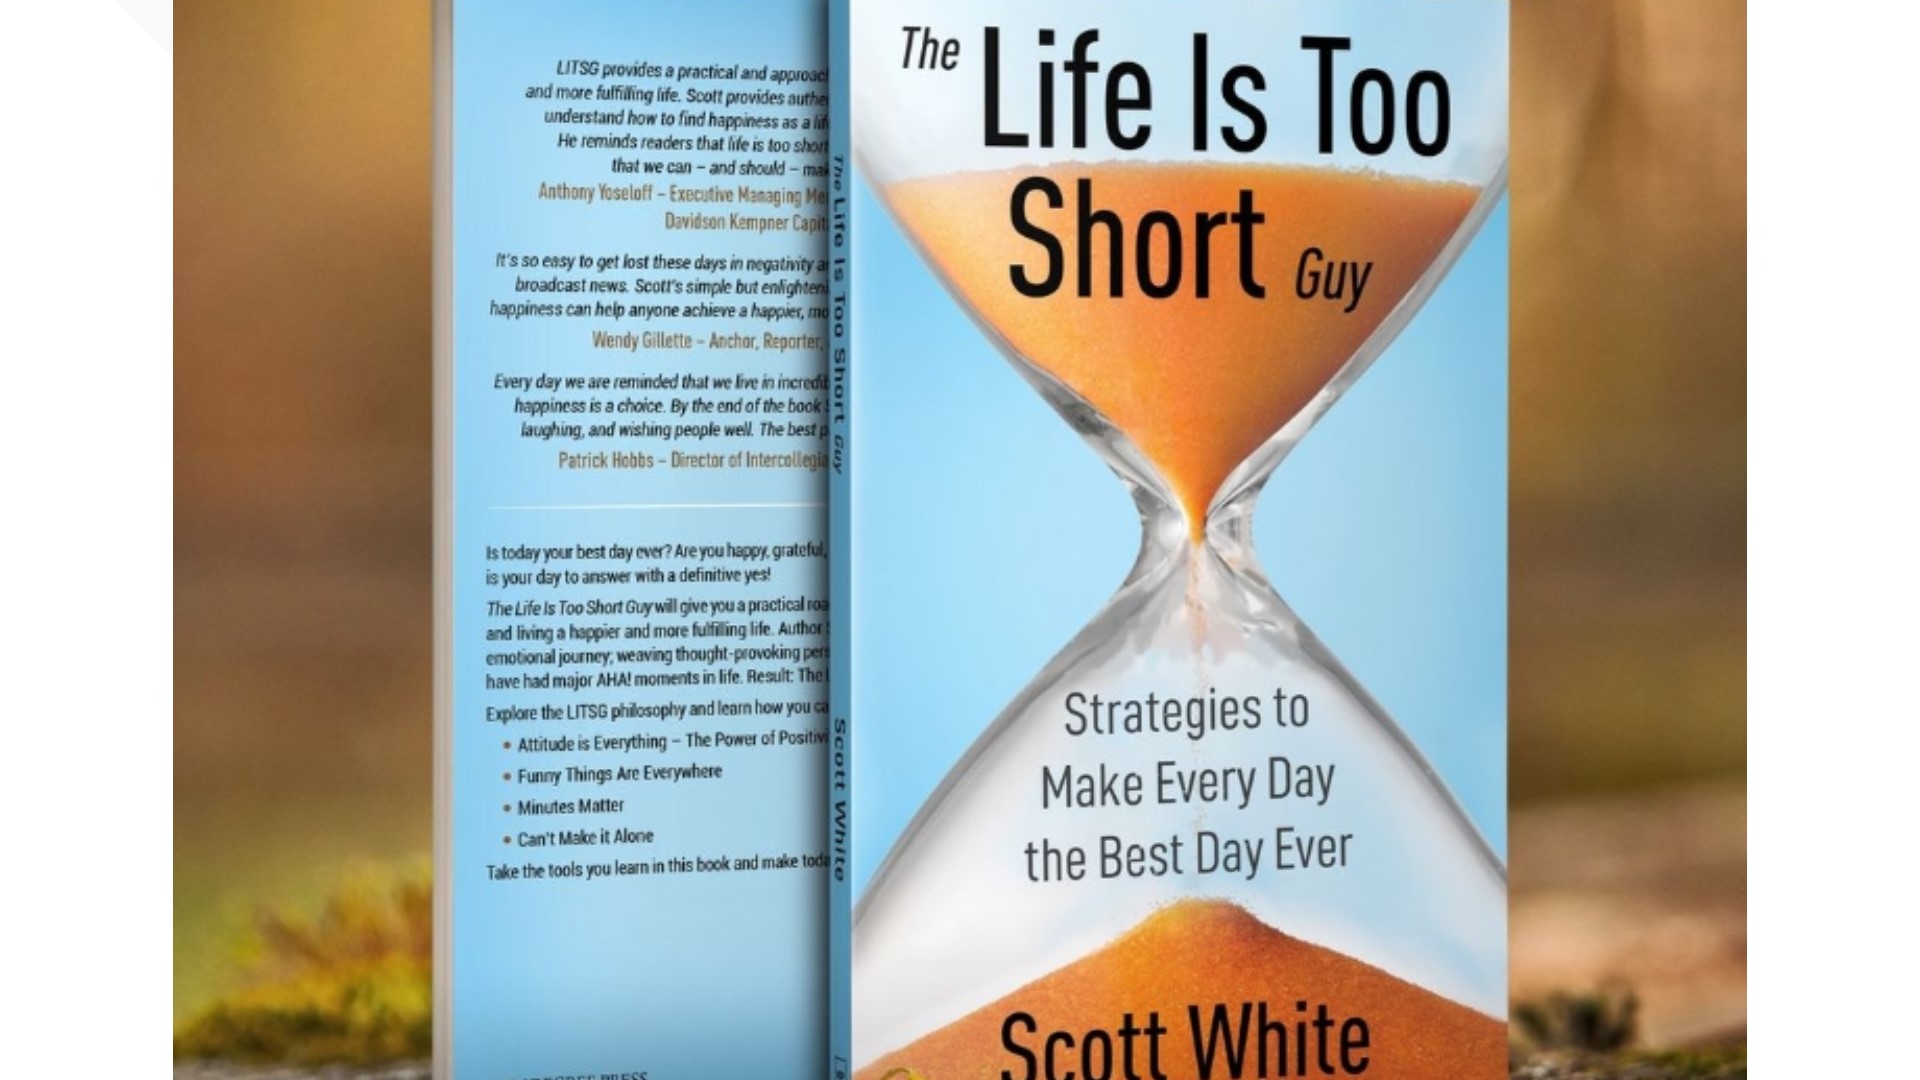 Author Scott White, aka 'The Life is too Short Guy', discusses the power of positivity in his new book.